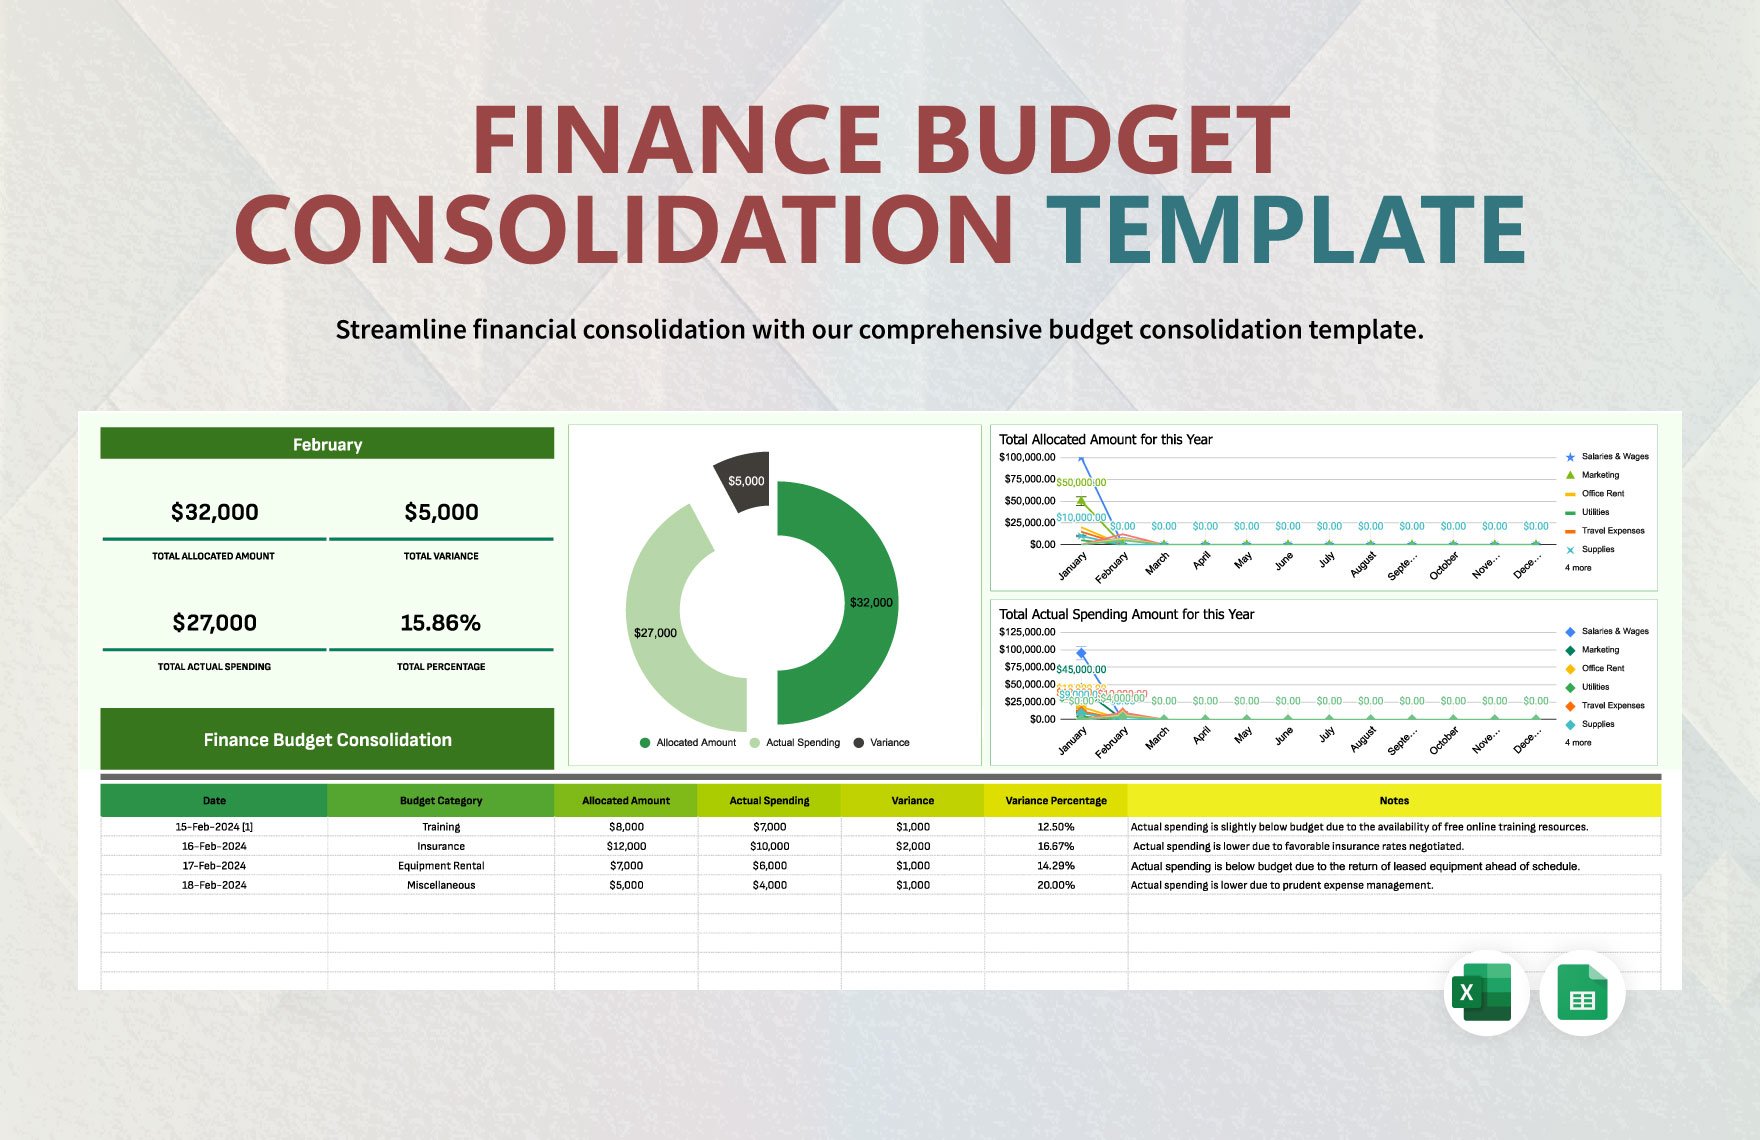 Finance Budget Consolidation Template